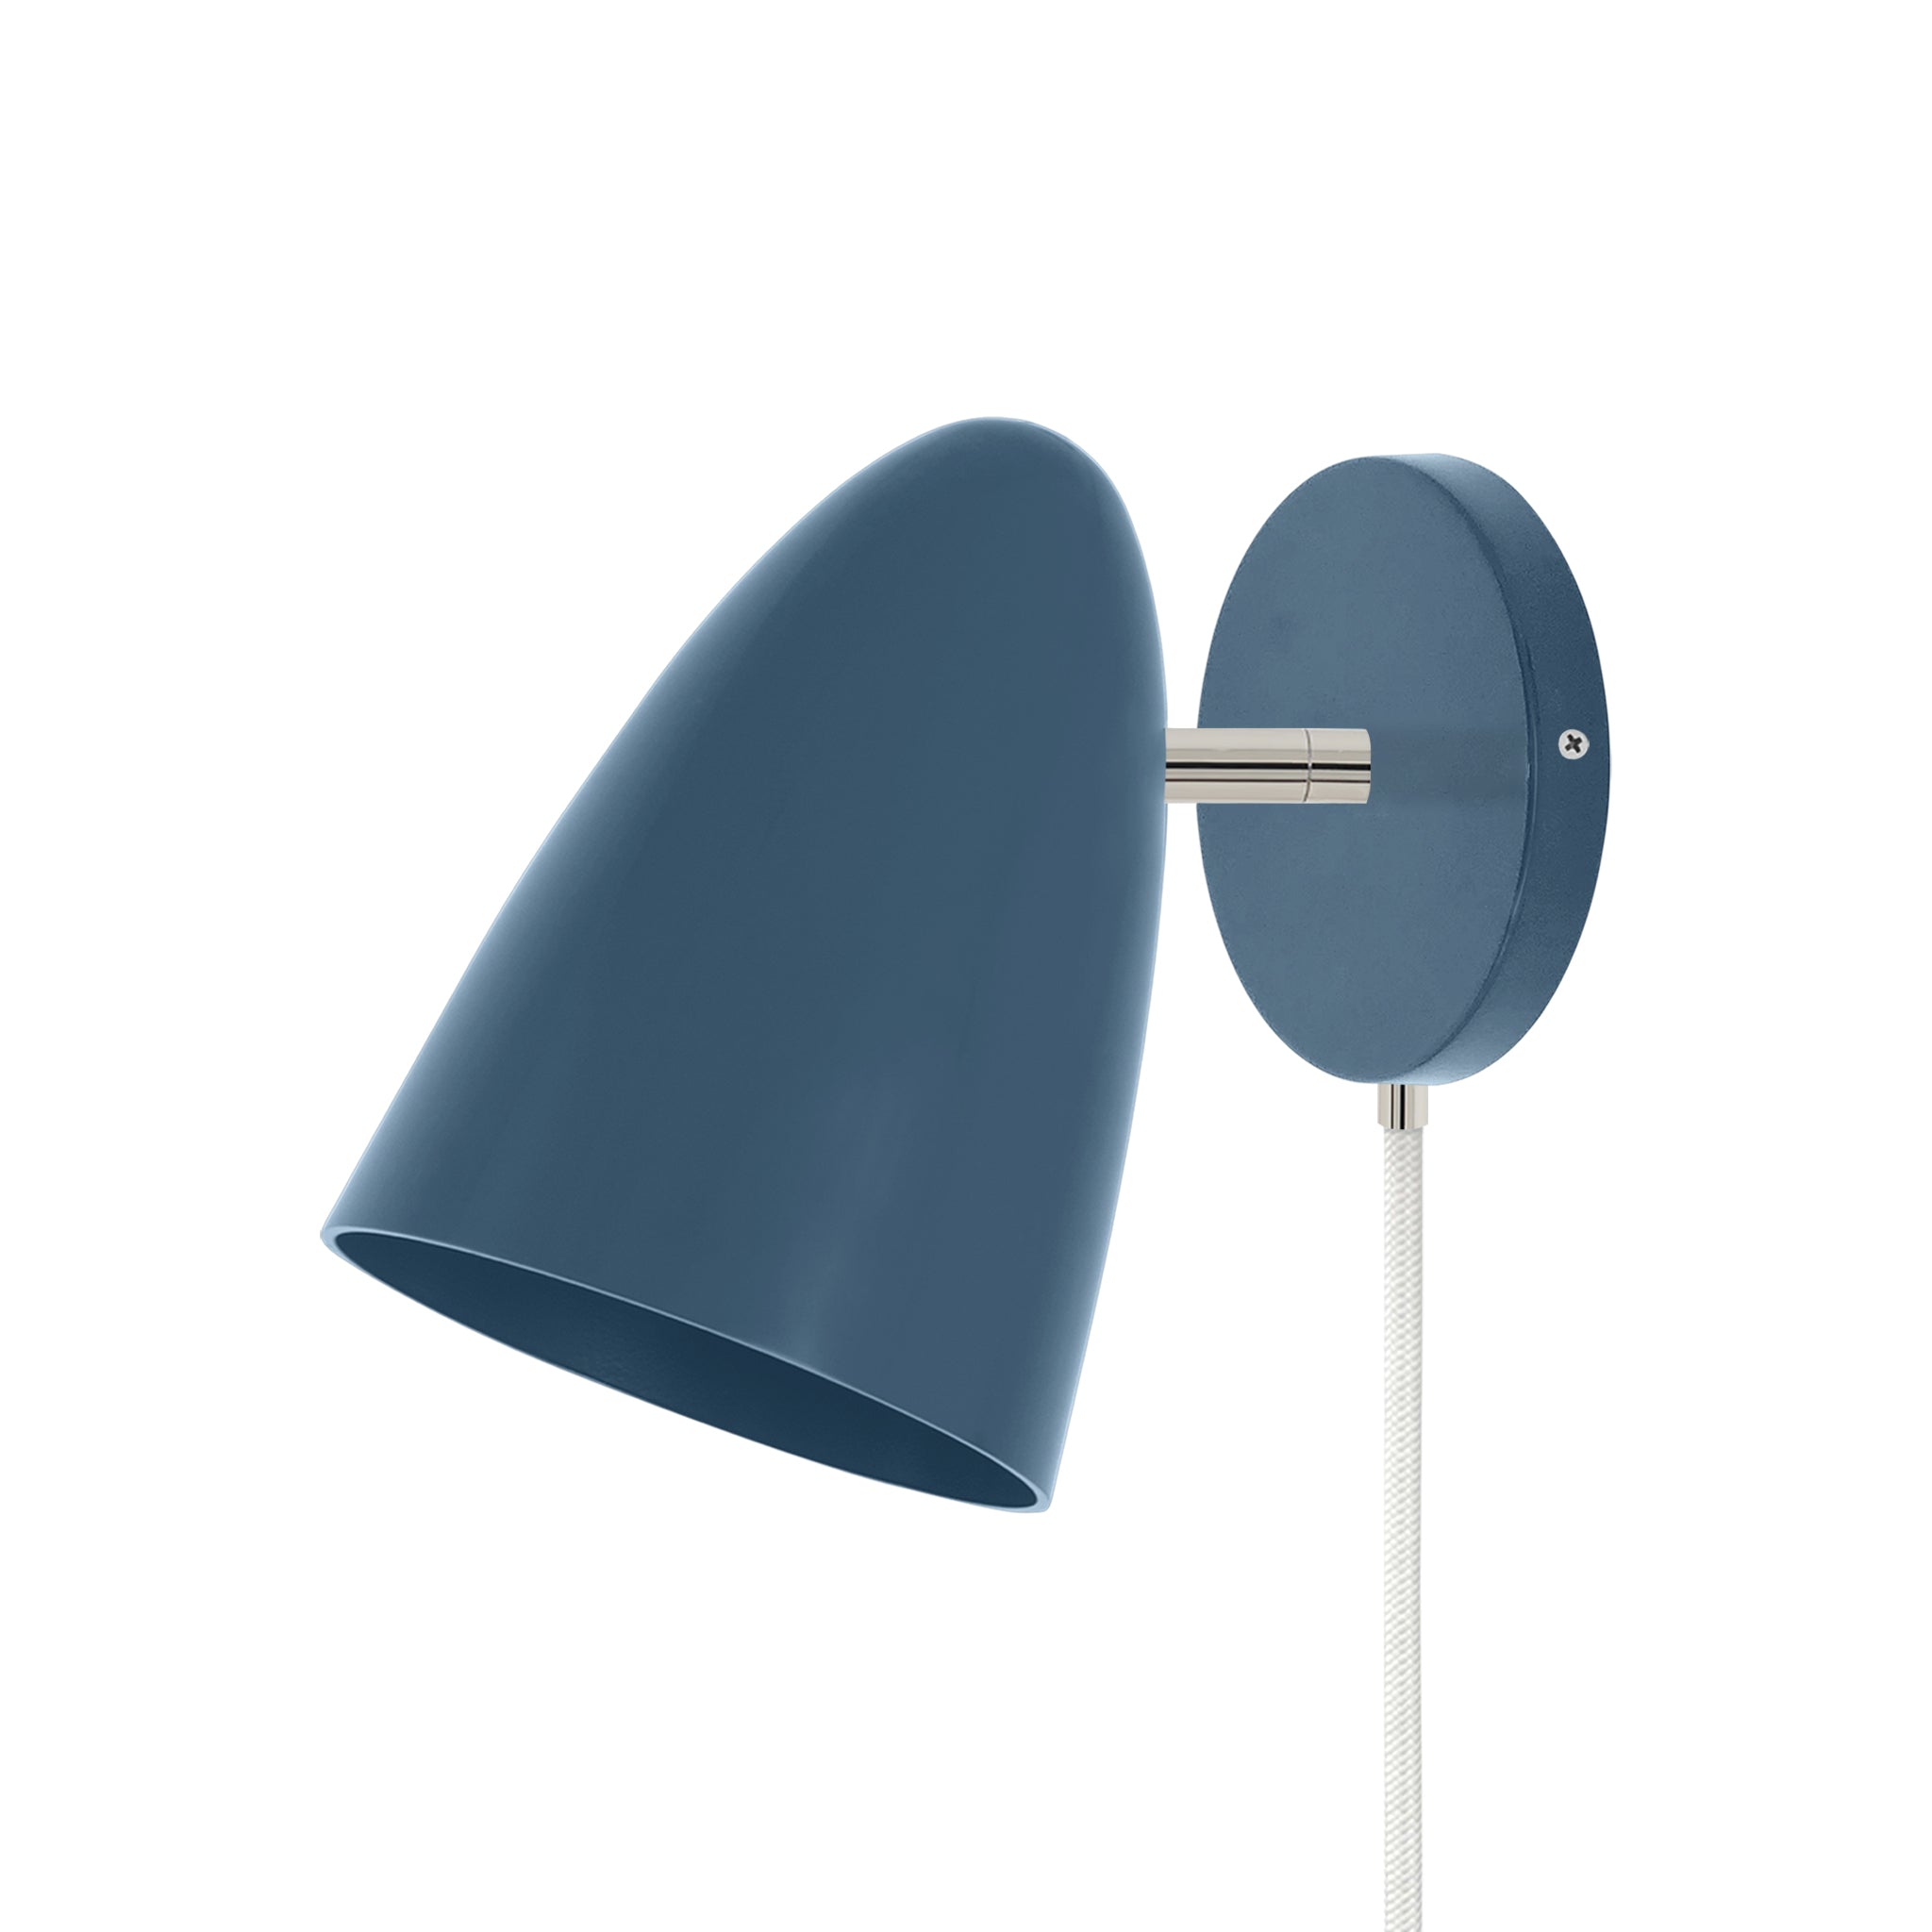 Nickel and slate blue color Boom plug-in sconce no arm Dutton Brown lighting